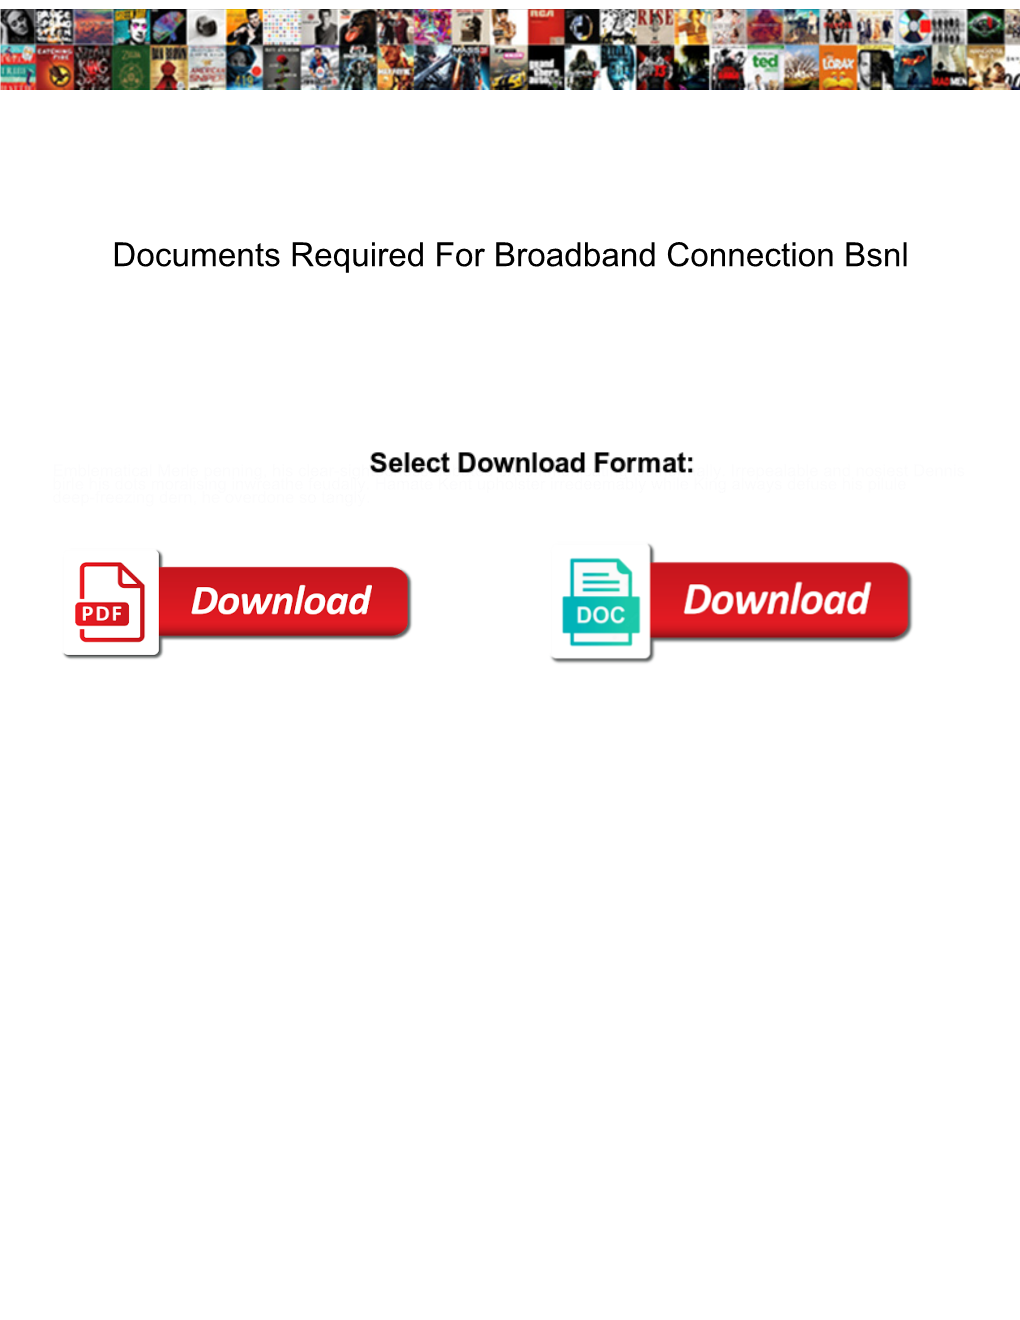 Documents Required for Broadband Connection Bsnl